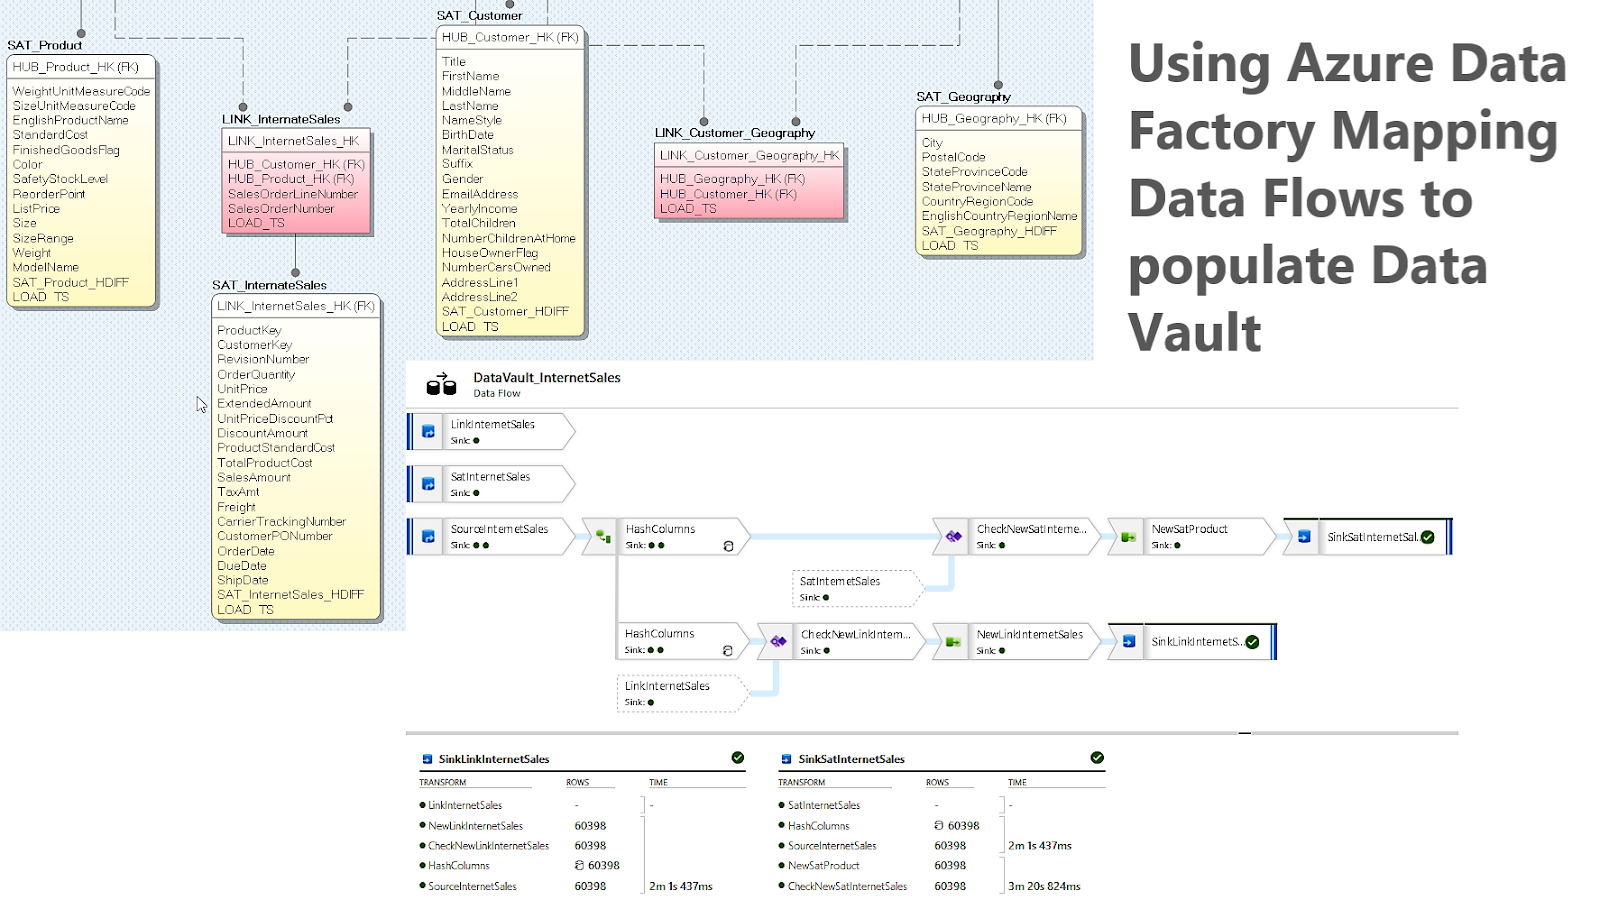 Using Azure Data Factory Mapping Data Flows to populate Data Vault